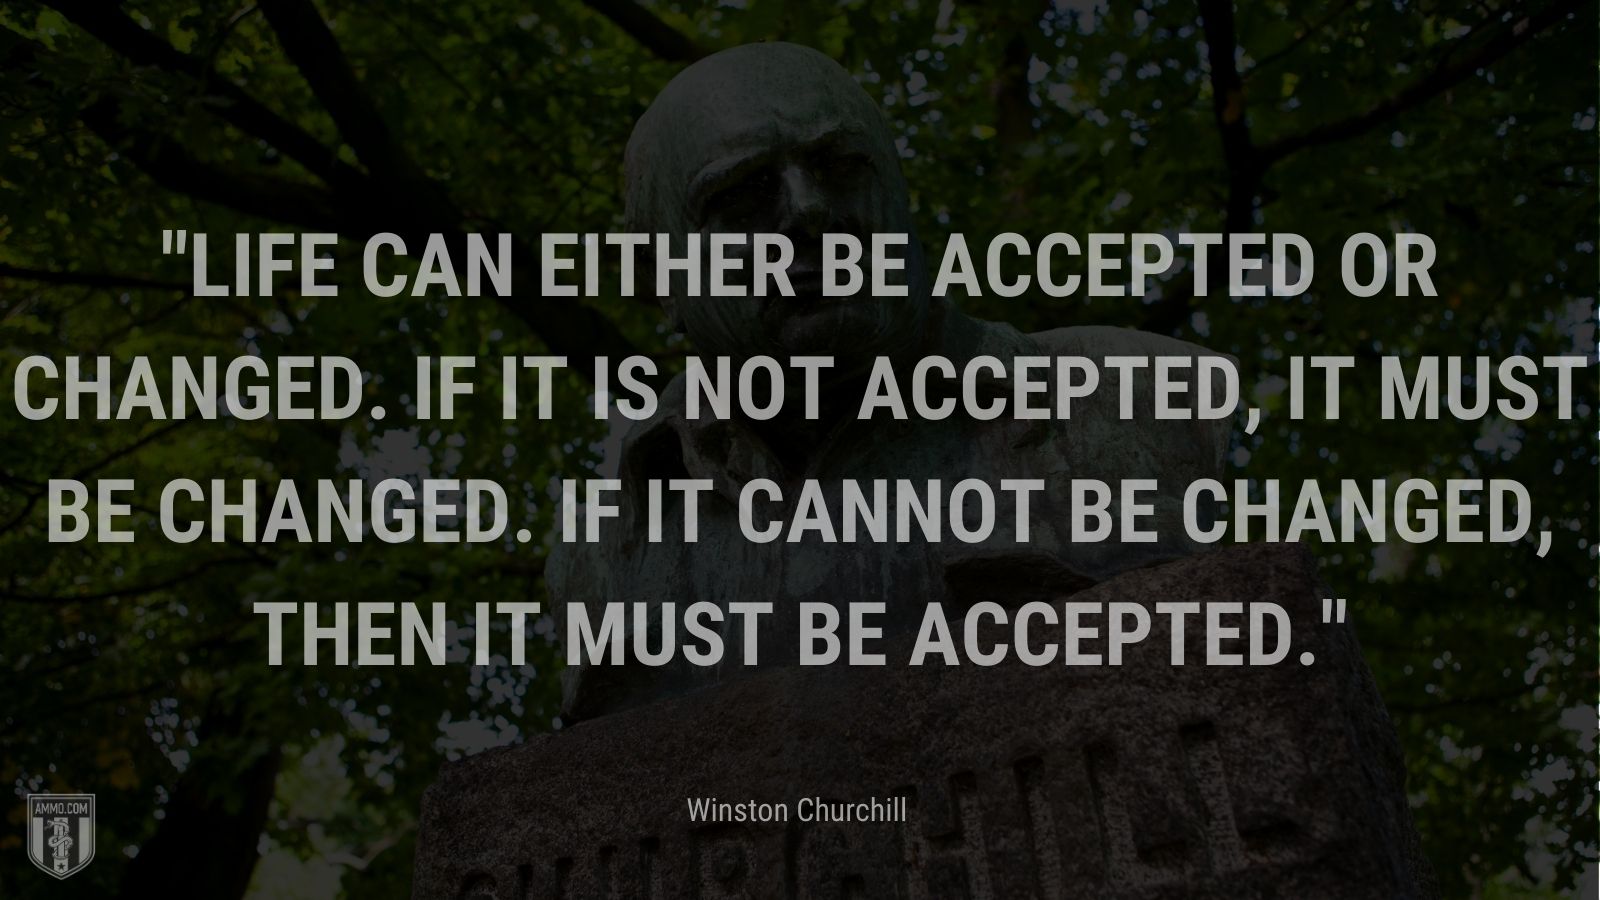 Life can either be accepted or changed. If it is not accepted, it must be changed. If it cannot be changed, then it must be accepted.